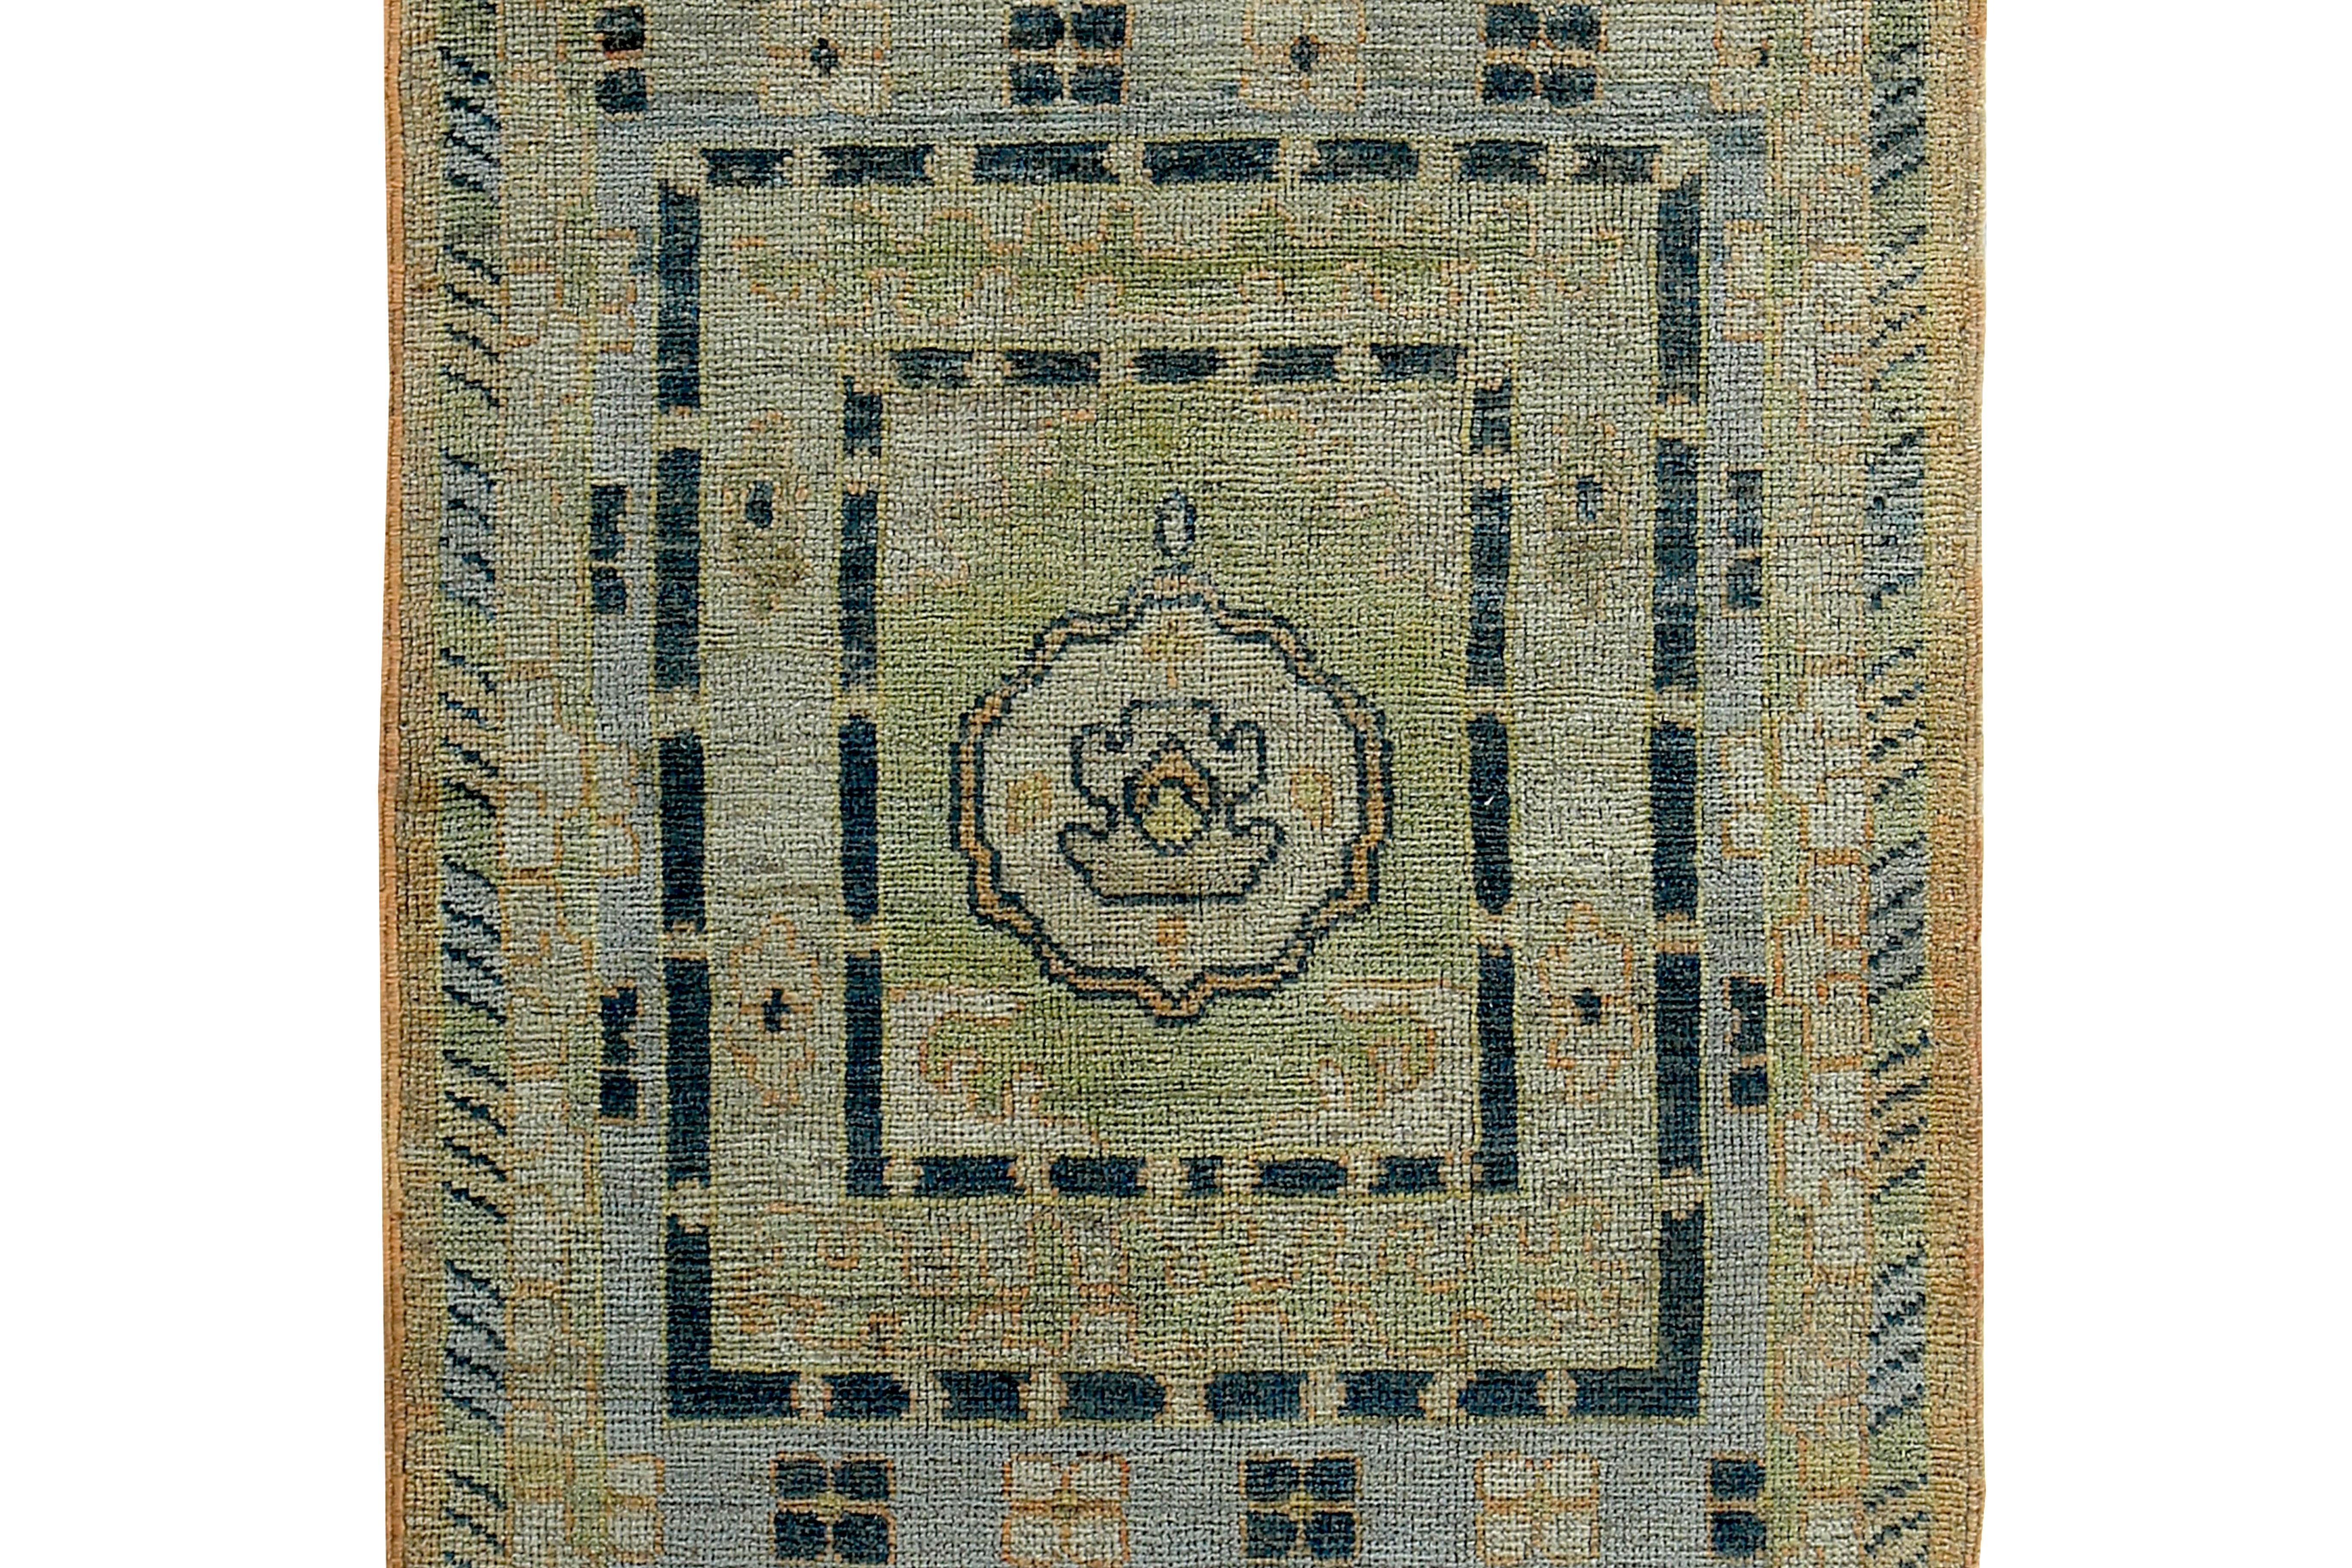 Turkish Oushak Runner Rug with Navy & Green Floral Patterns on Blue & Orange Fie In New Condition For Sale In Dallas, TX